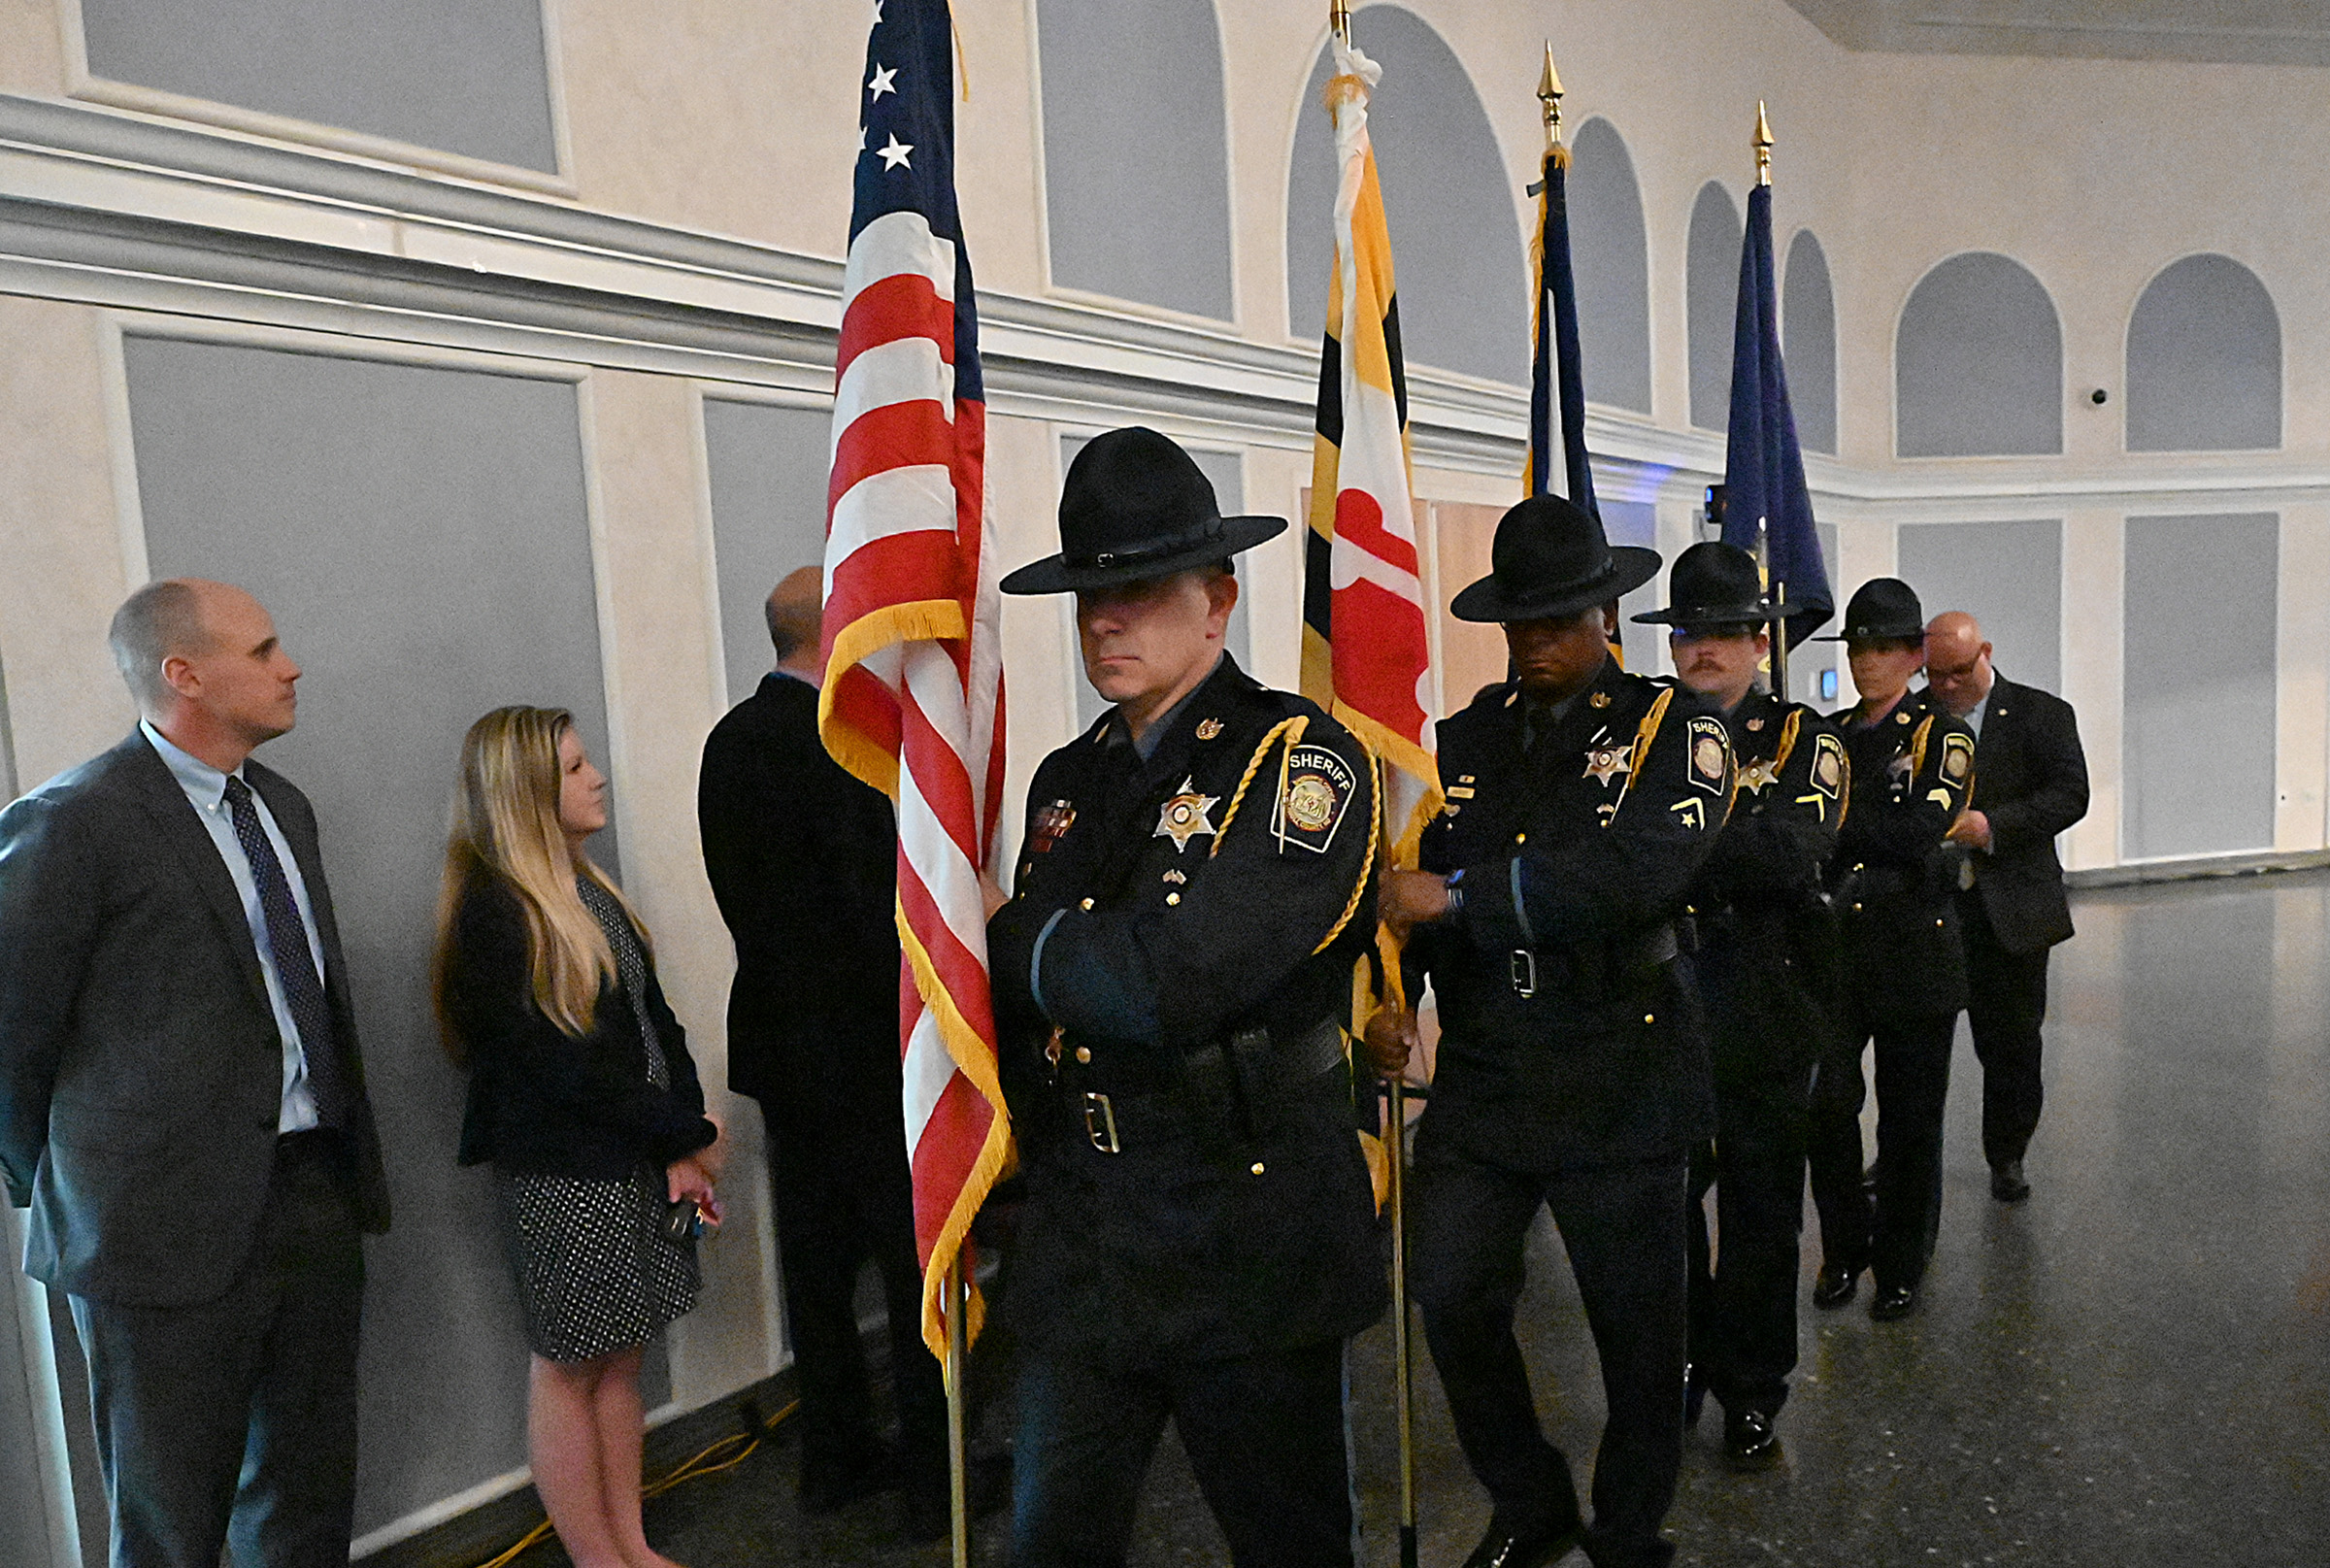 The Carroll County Sheriff's Office Honor Guard, led by Master Deputy Mario DeVivio, presented the colors at Carroll County's 9th Annual Drug Overdose and Prevention Vigil Tuesday at Portico at St. John in Westminster. (Jeffrey F. Bill/Staff photo)